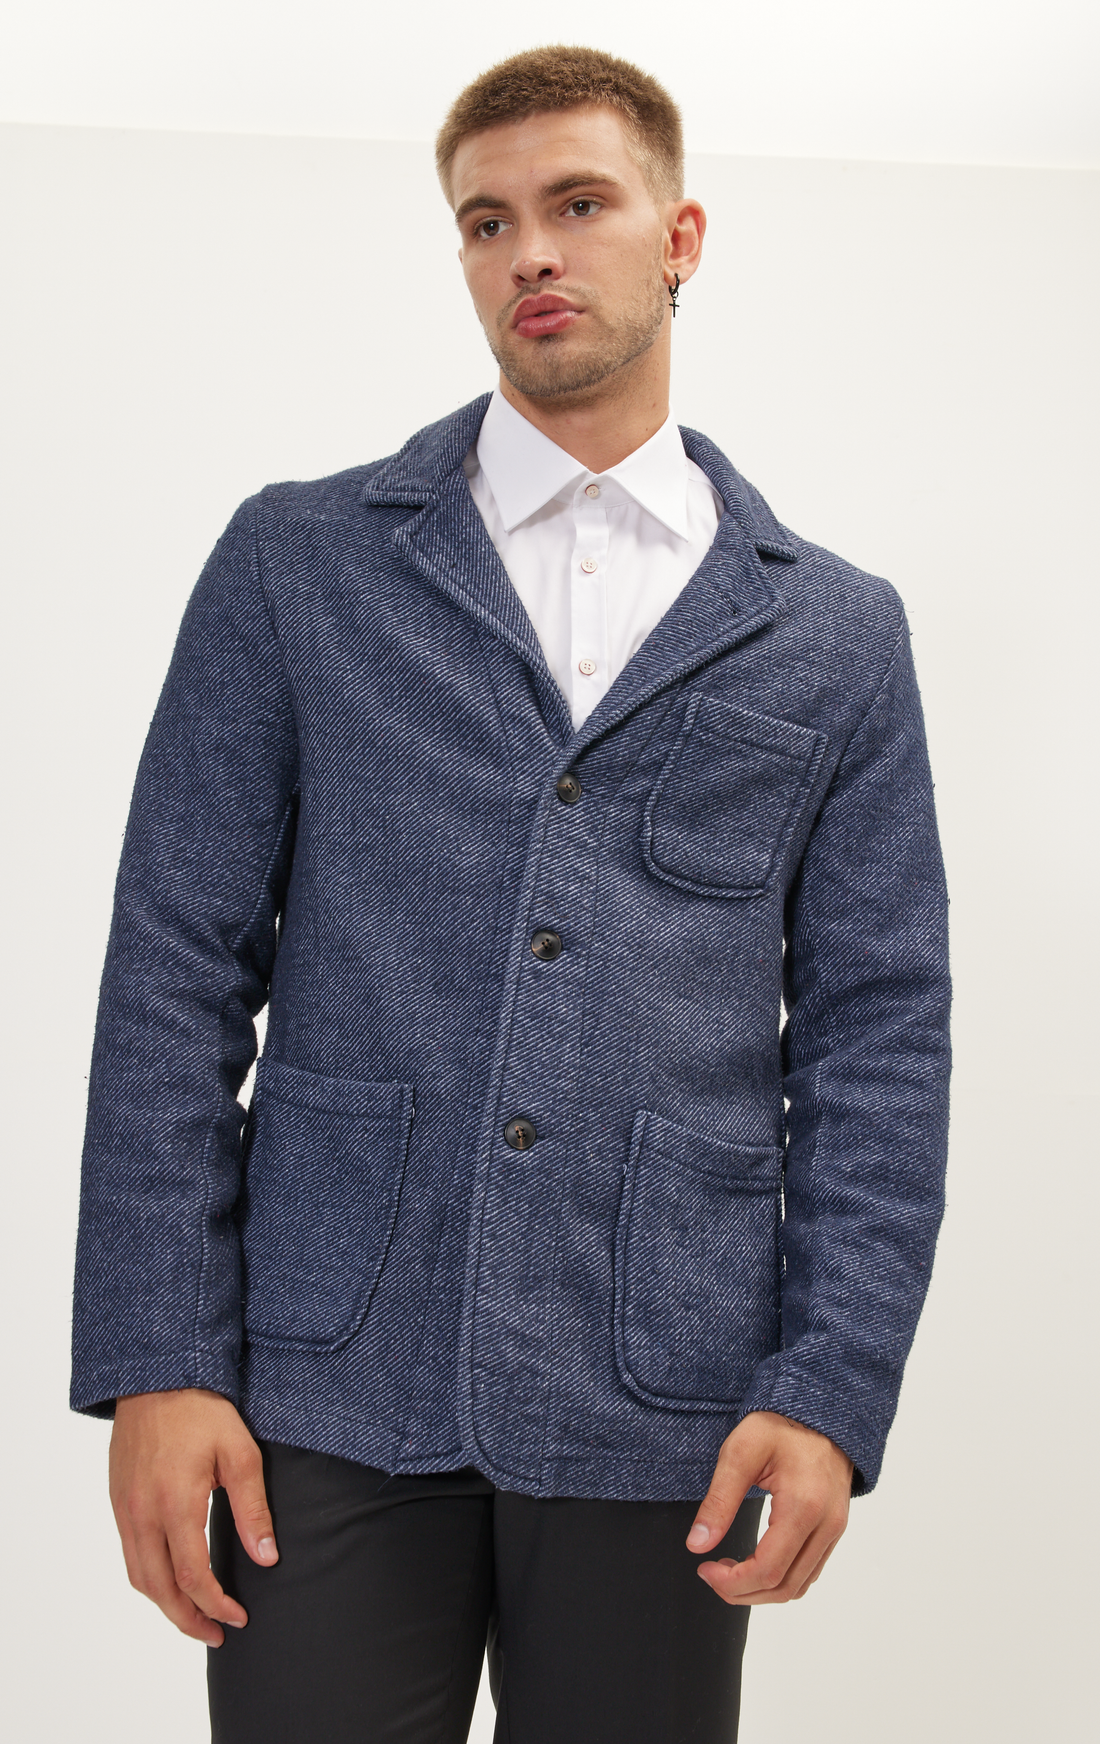 N° 5998 TWILL COTTON 3-BUTTONS TRAVEL JACKET - NAVY